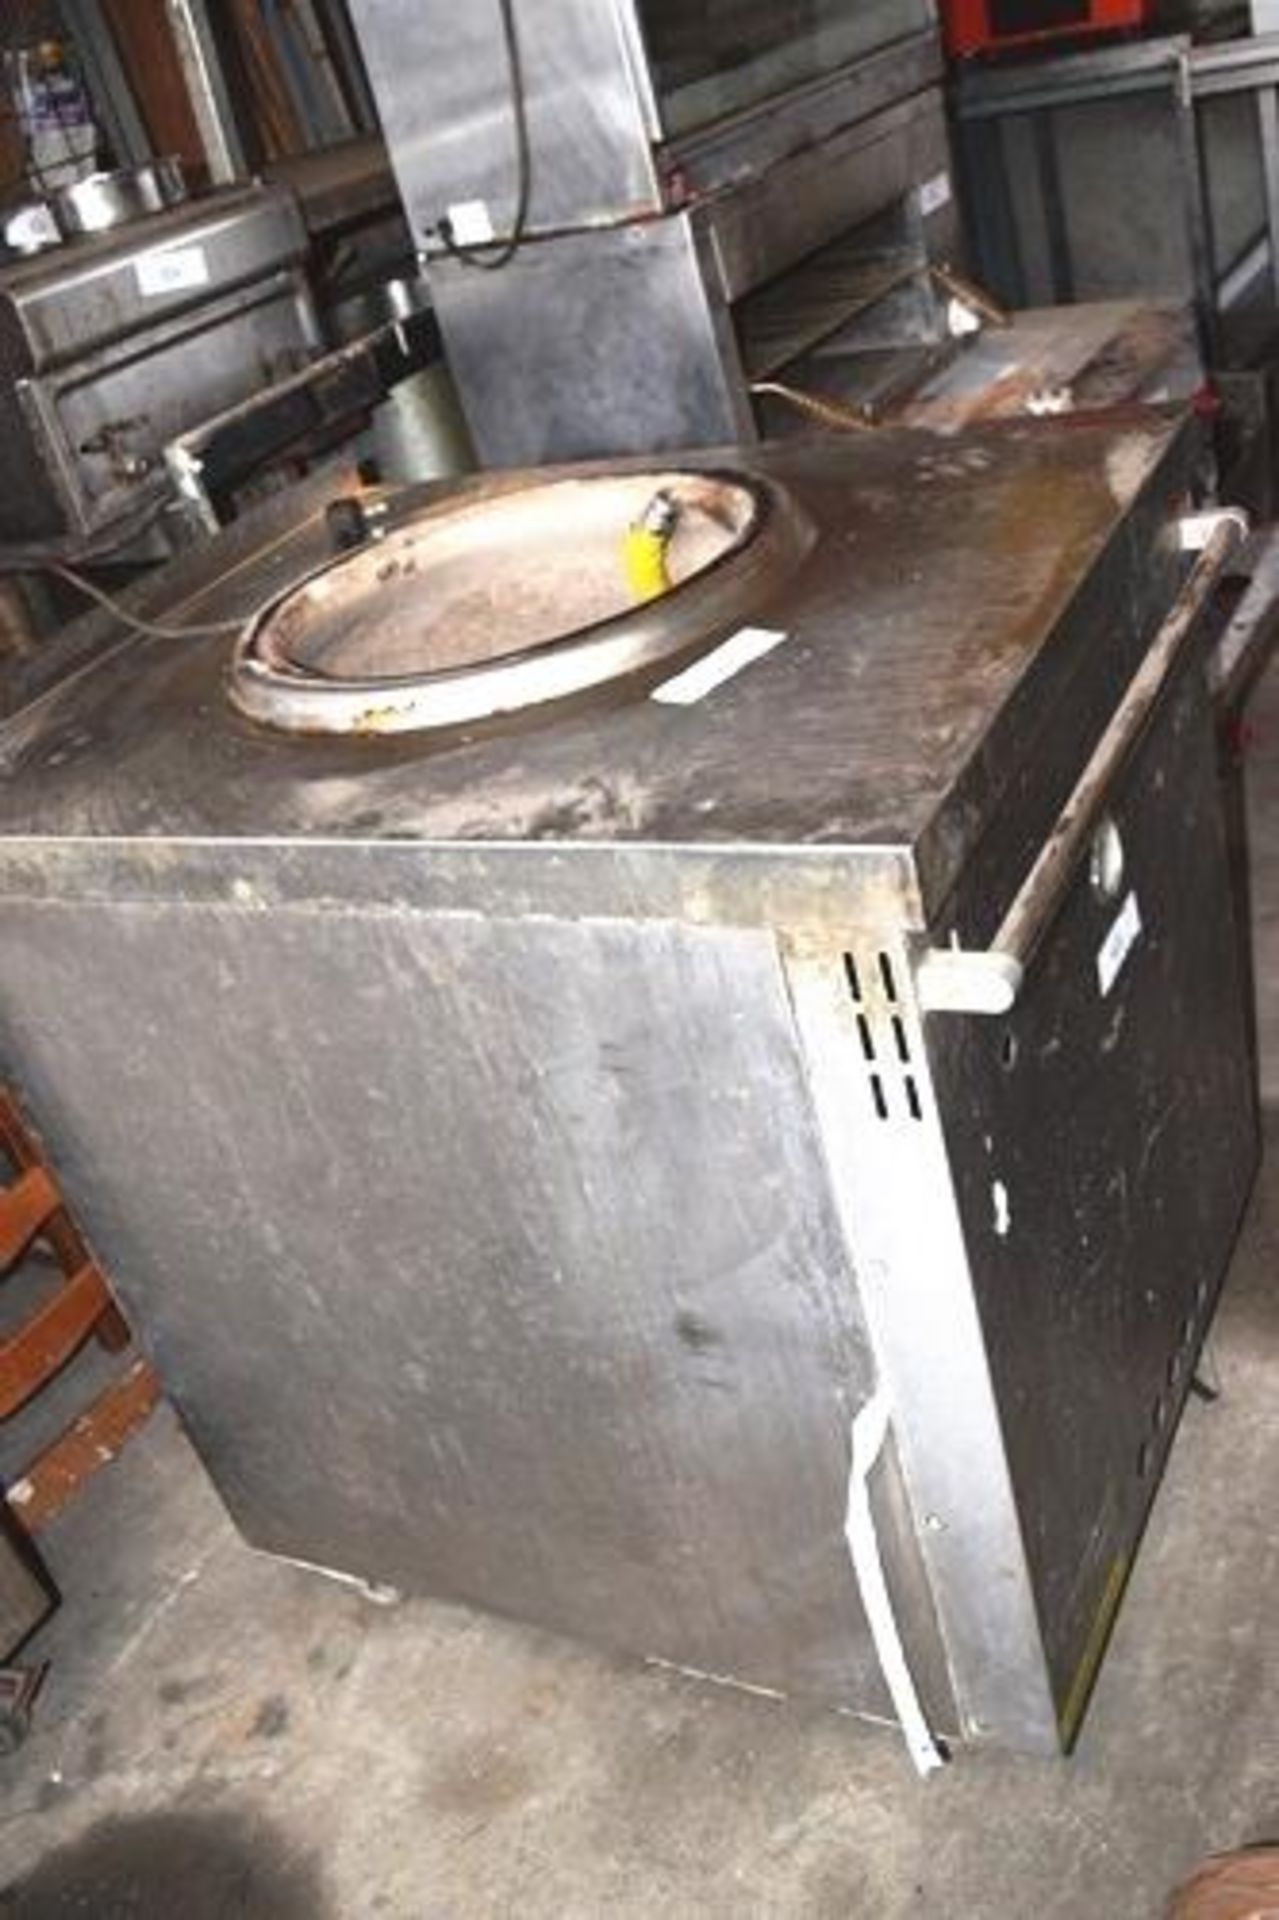 1 x Shaan gas powered tandoori oven, complete, no signs of cracking, no lid - Second-hand (yard) - Image 2 of 5